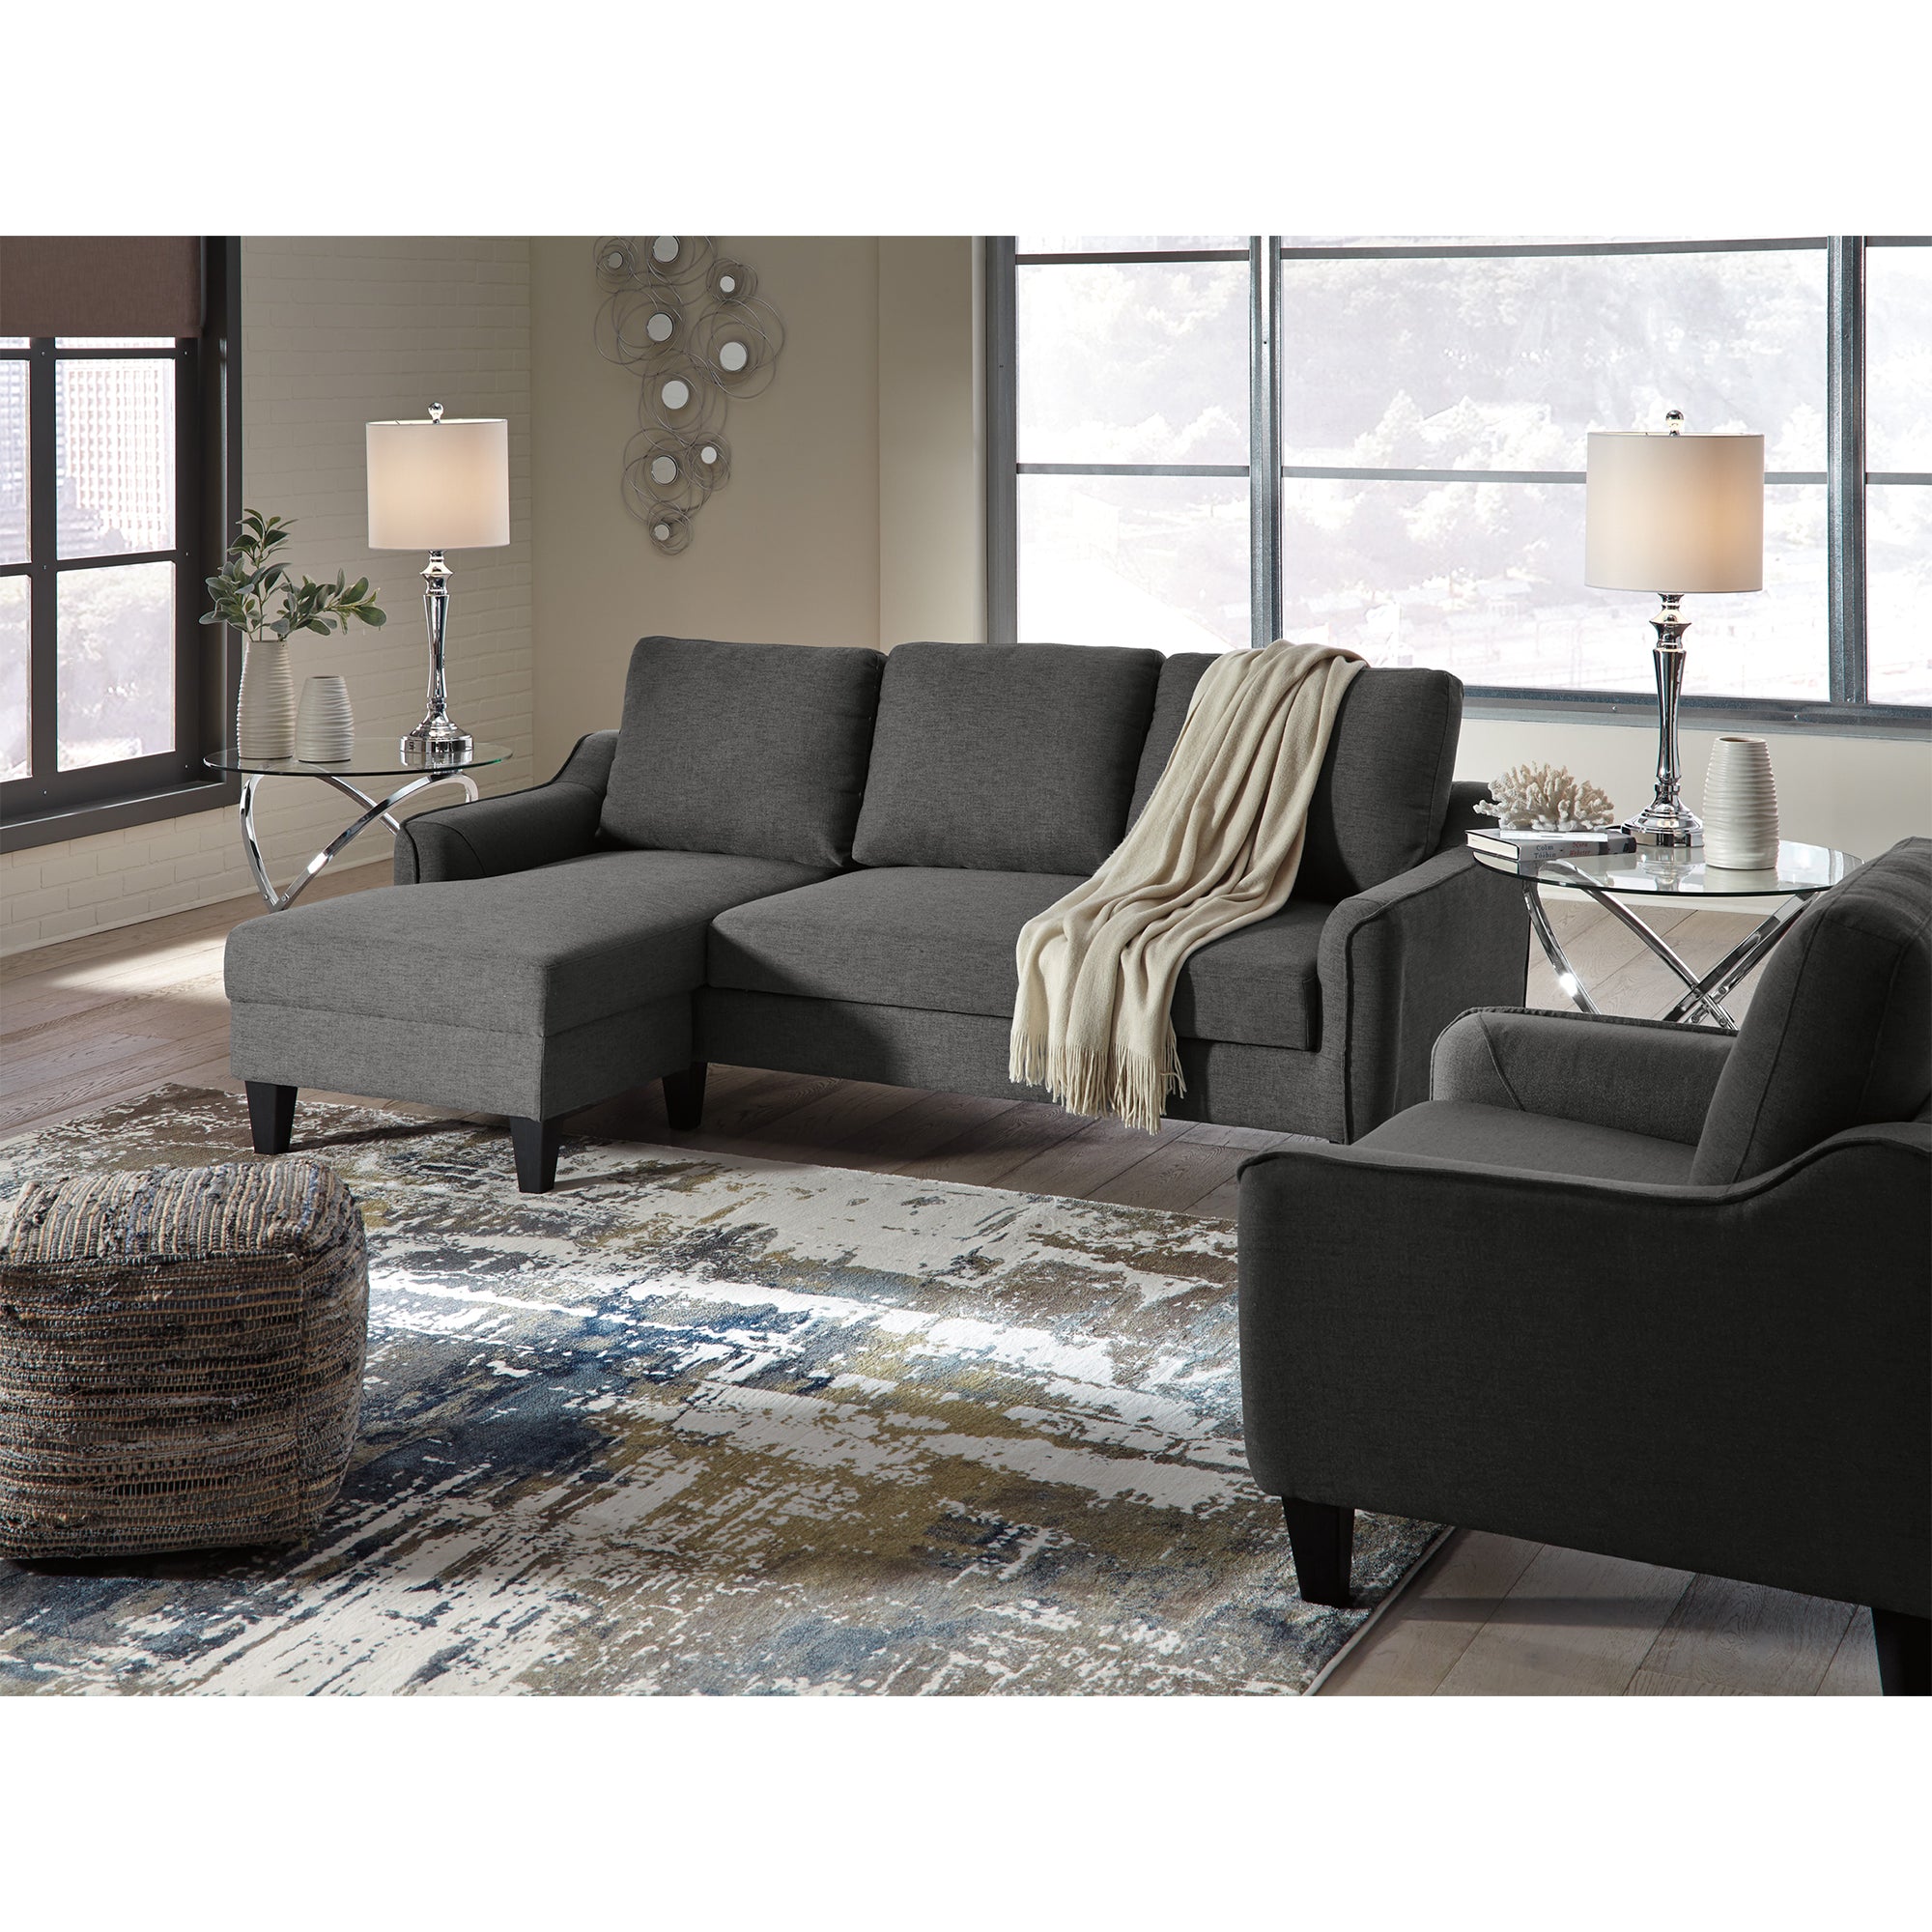 Jarreau Sofa Chaise and Chair in Gray Color